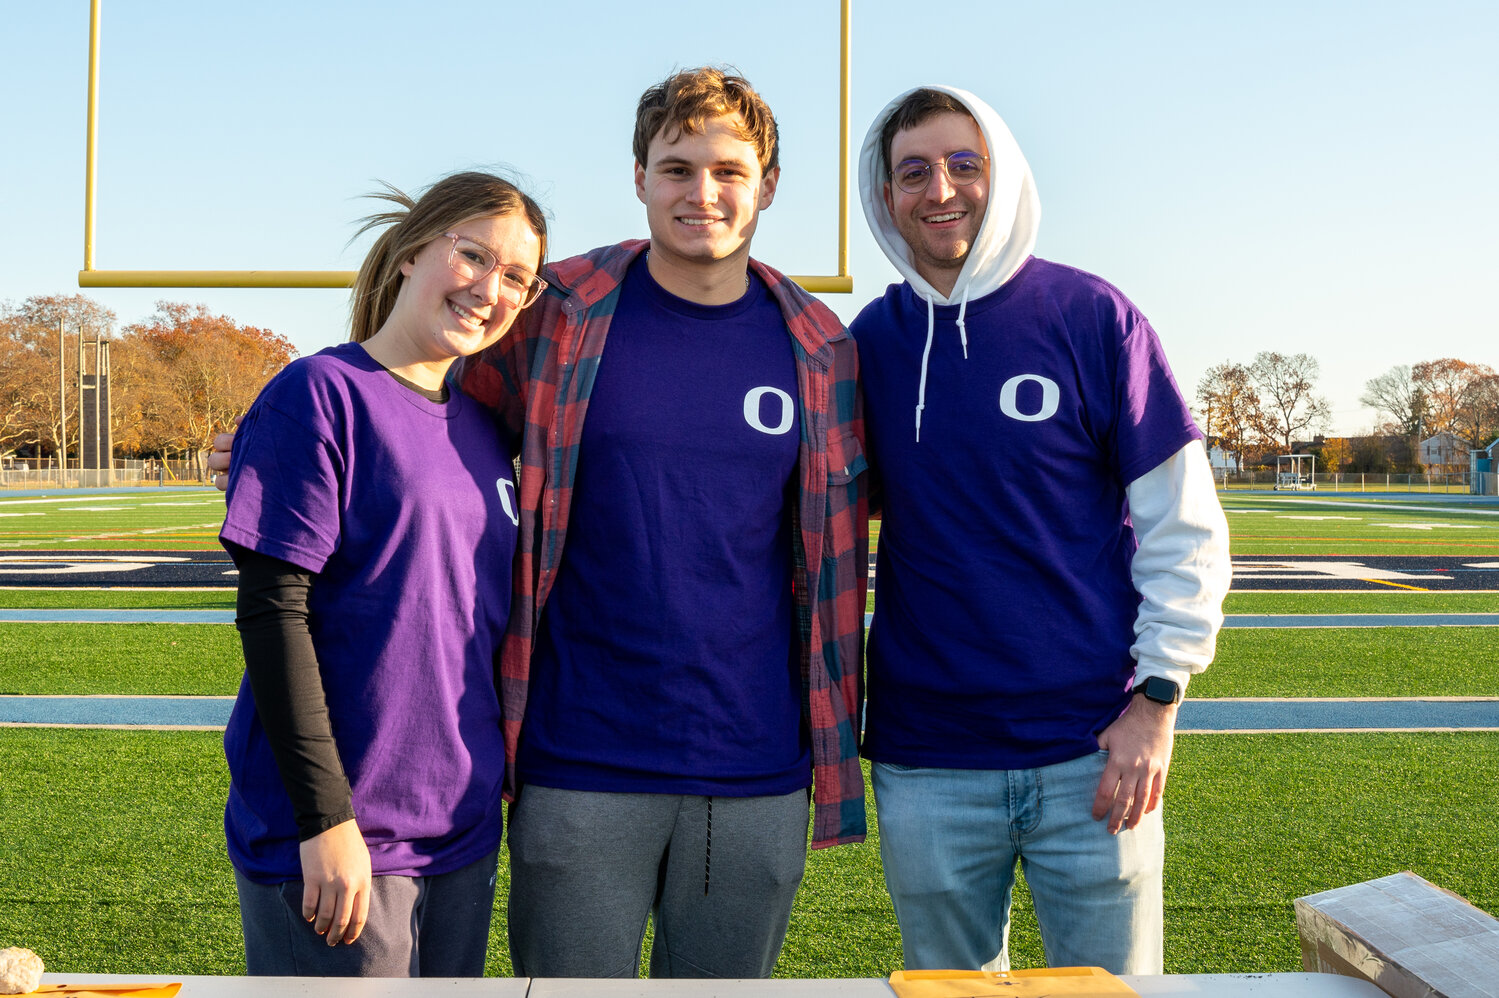 Sam Farsky, Justin Connolly and teacher Vincent Simonetti, the adviser of the National Science Honor Society, took their laps around the high school track.